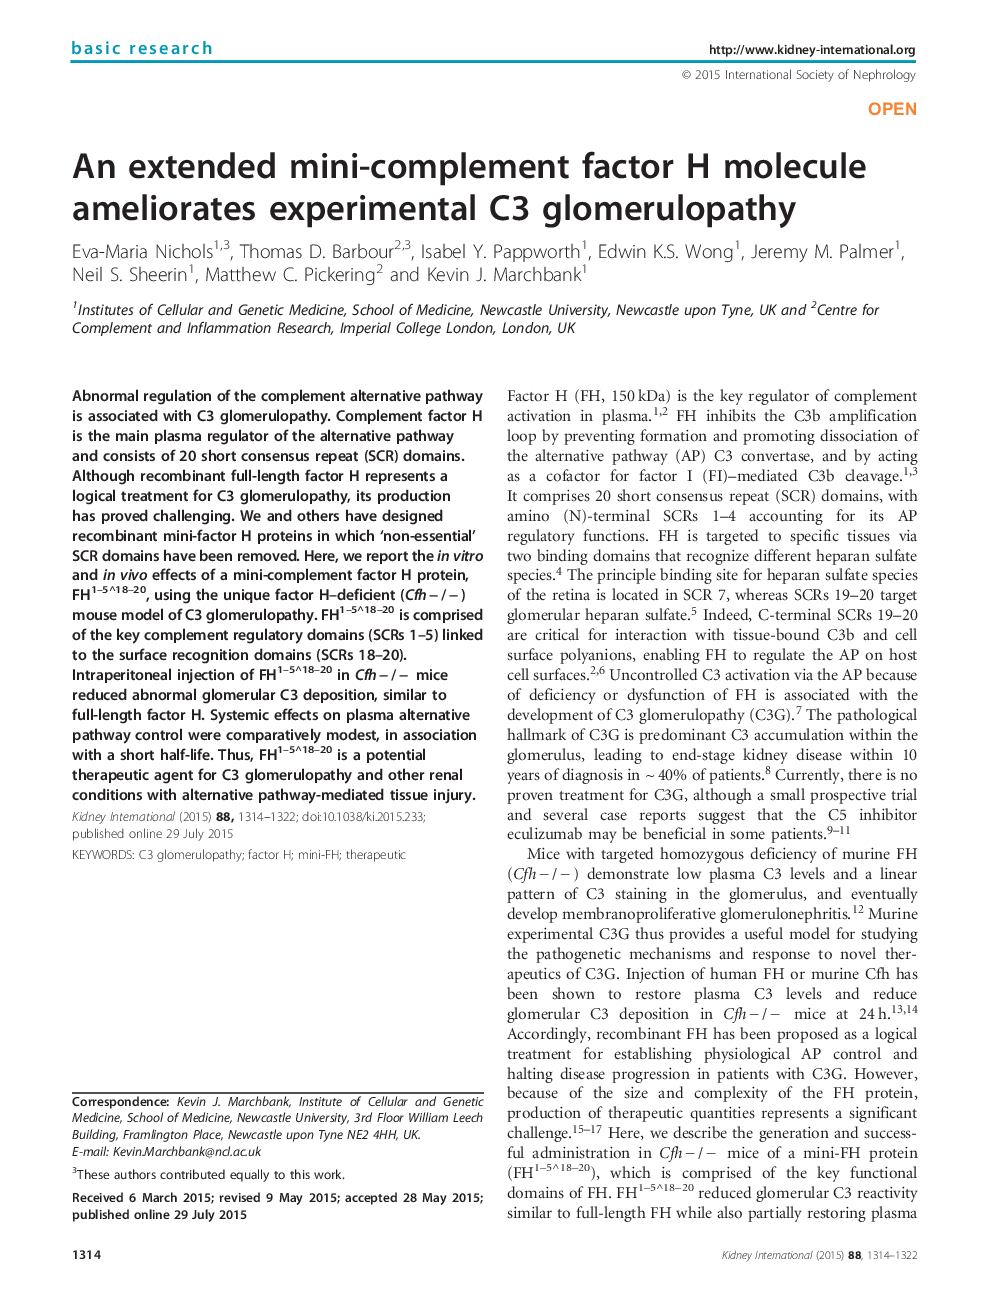 An extended mini-complement factor H molecule ameliorates experimental C3 glomerulopathy